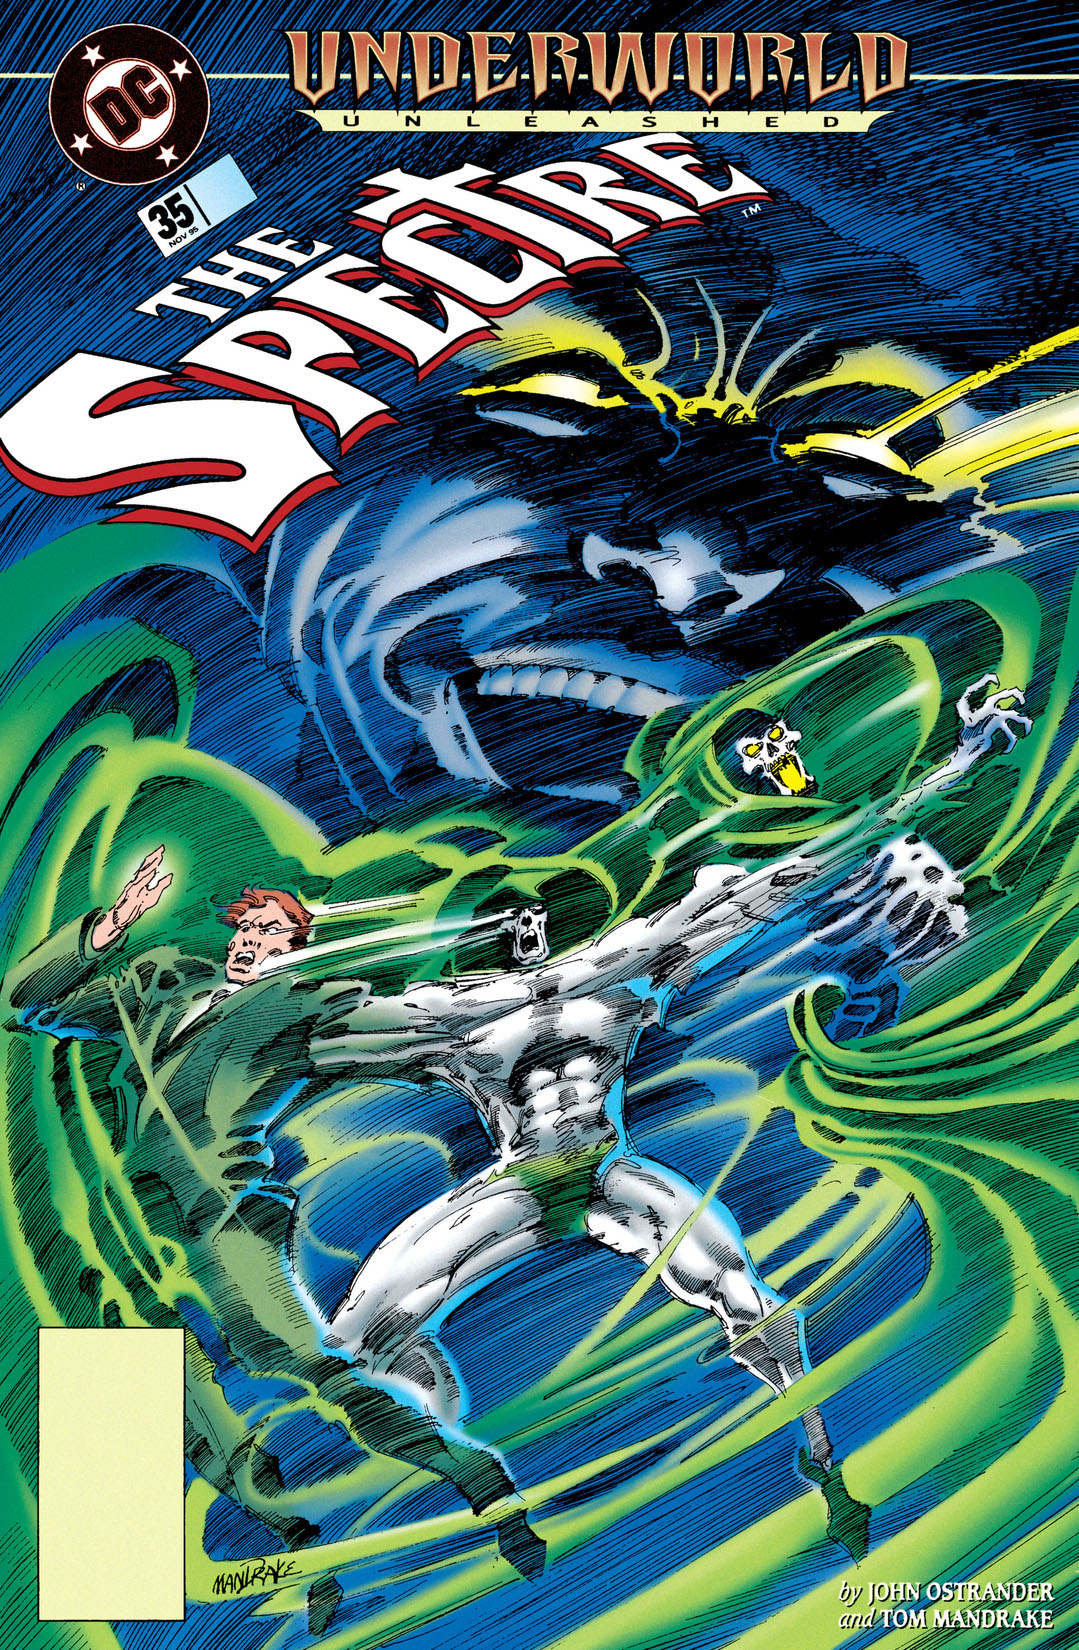 The Spectre (1992-) #35 preview images